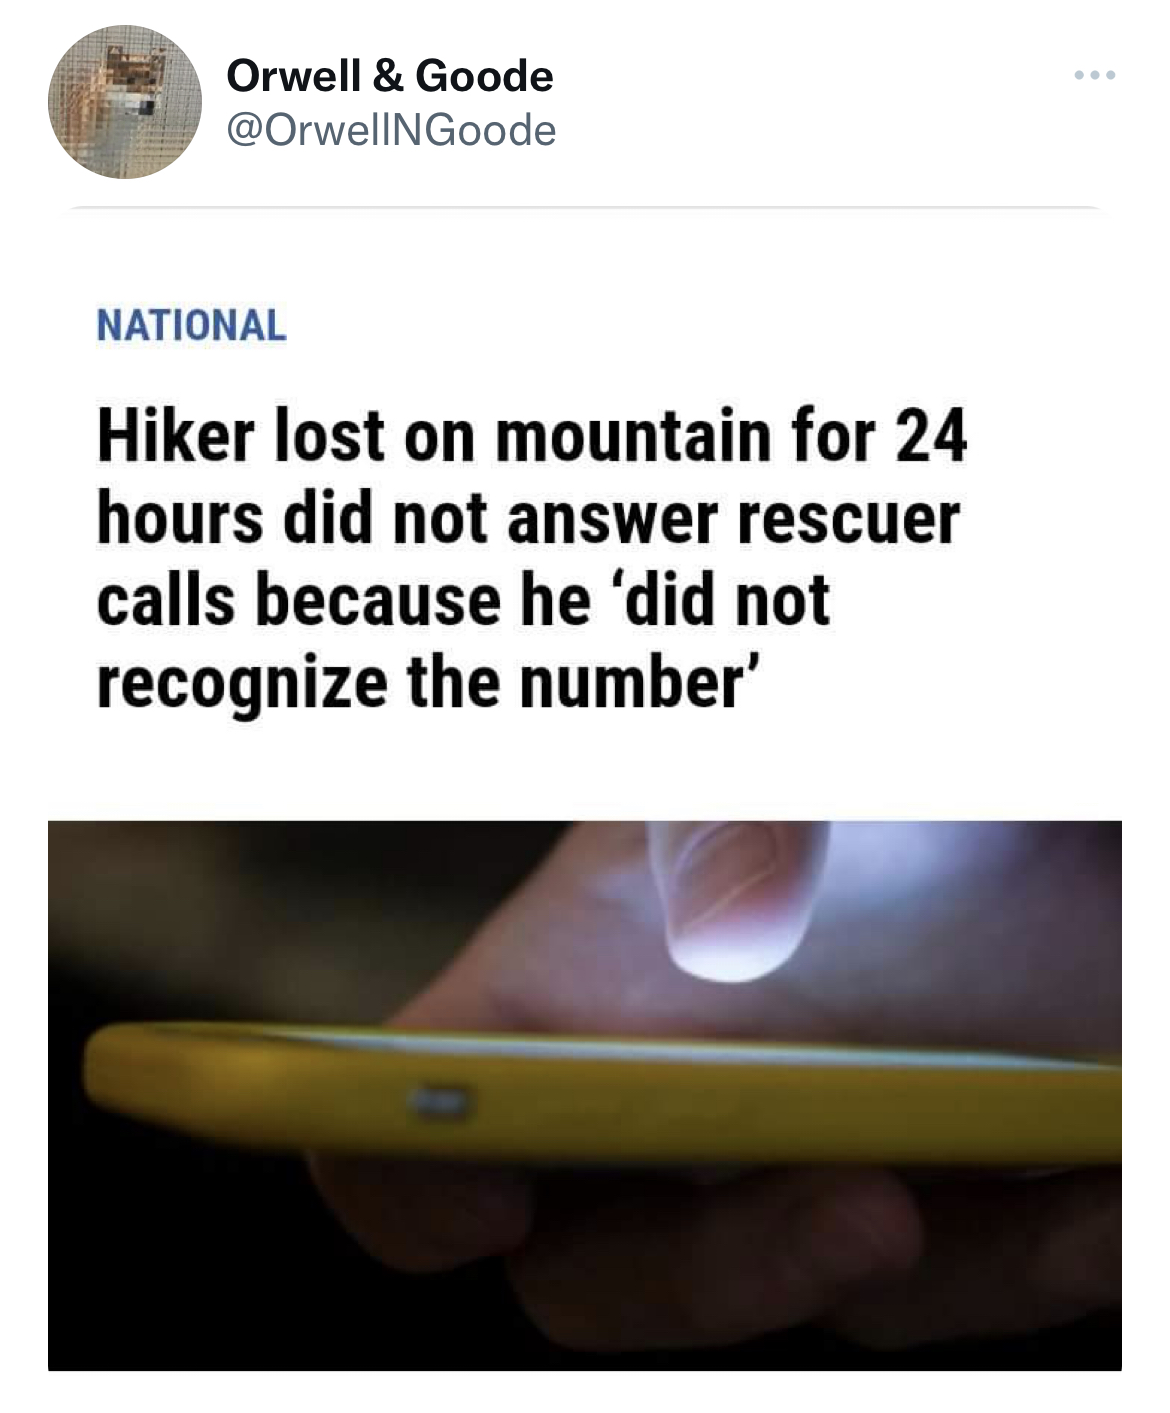 funny quick wit tweets - Internet meme - Orwell & Goode National Hiker lost on mountain for 24 hours did not answer rescuer calls because he 'did not recognize the number'